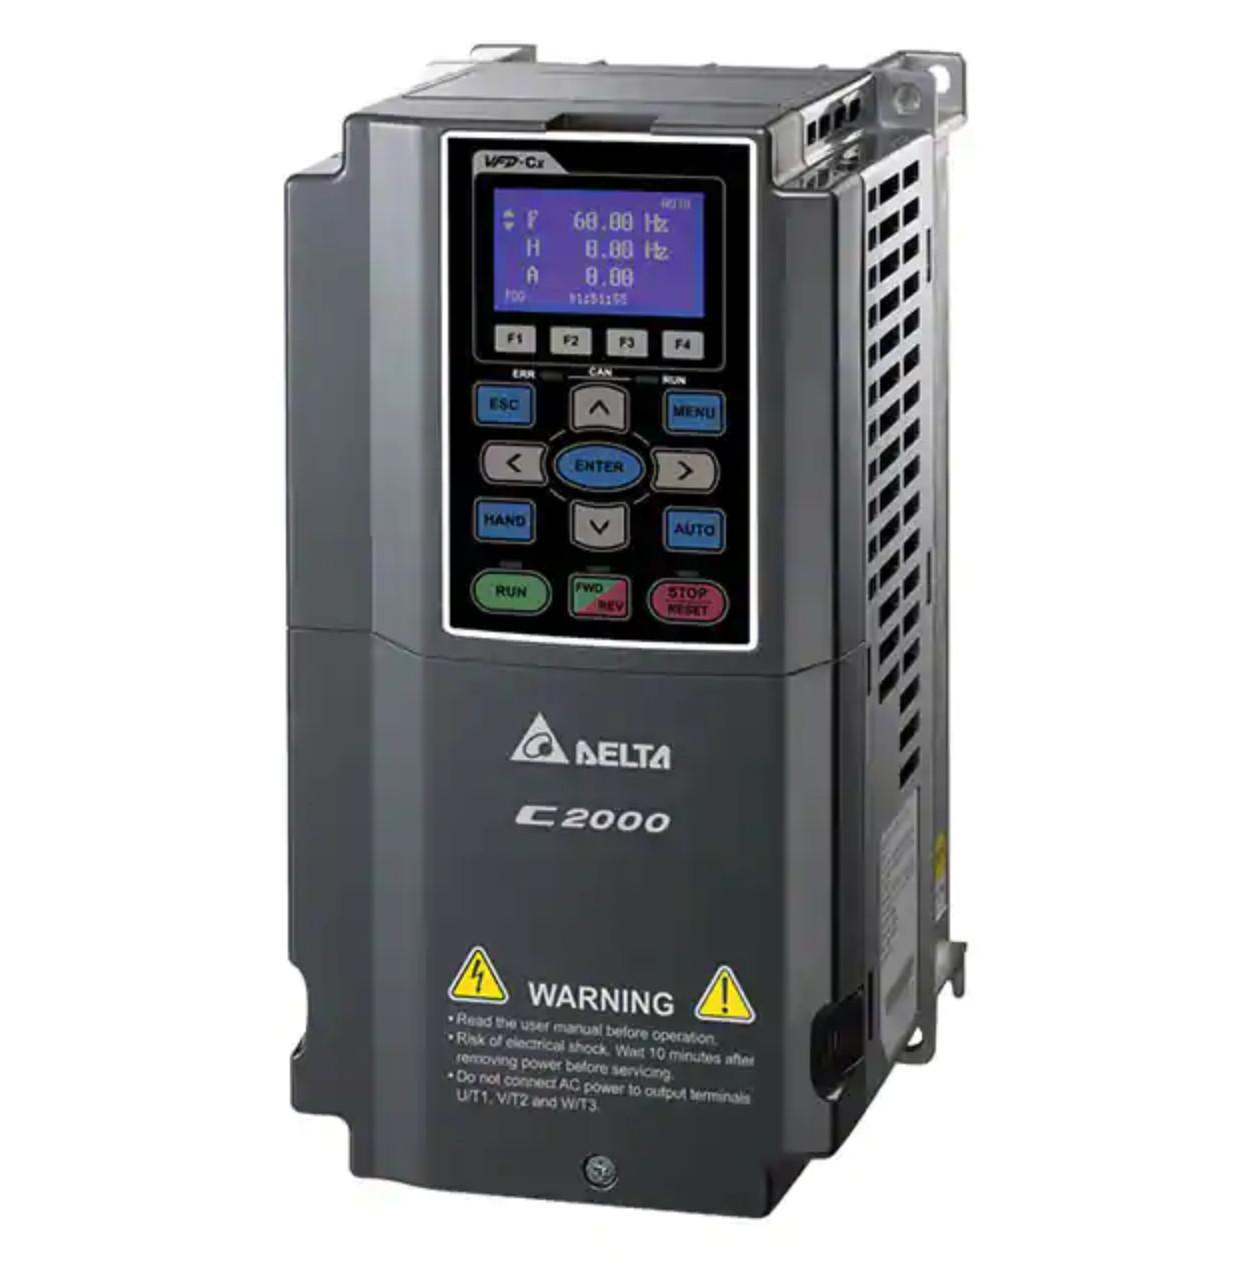 Delta VFD037C4EA-21 Variable Frequency Drive, 3 phase, 460 VAC build-in EMI Input, 5 HP, frame A, wall mount, IP20, NEMA 1